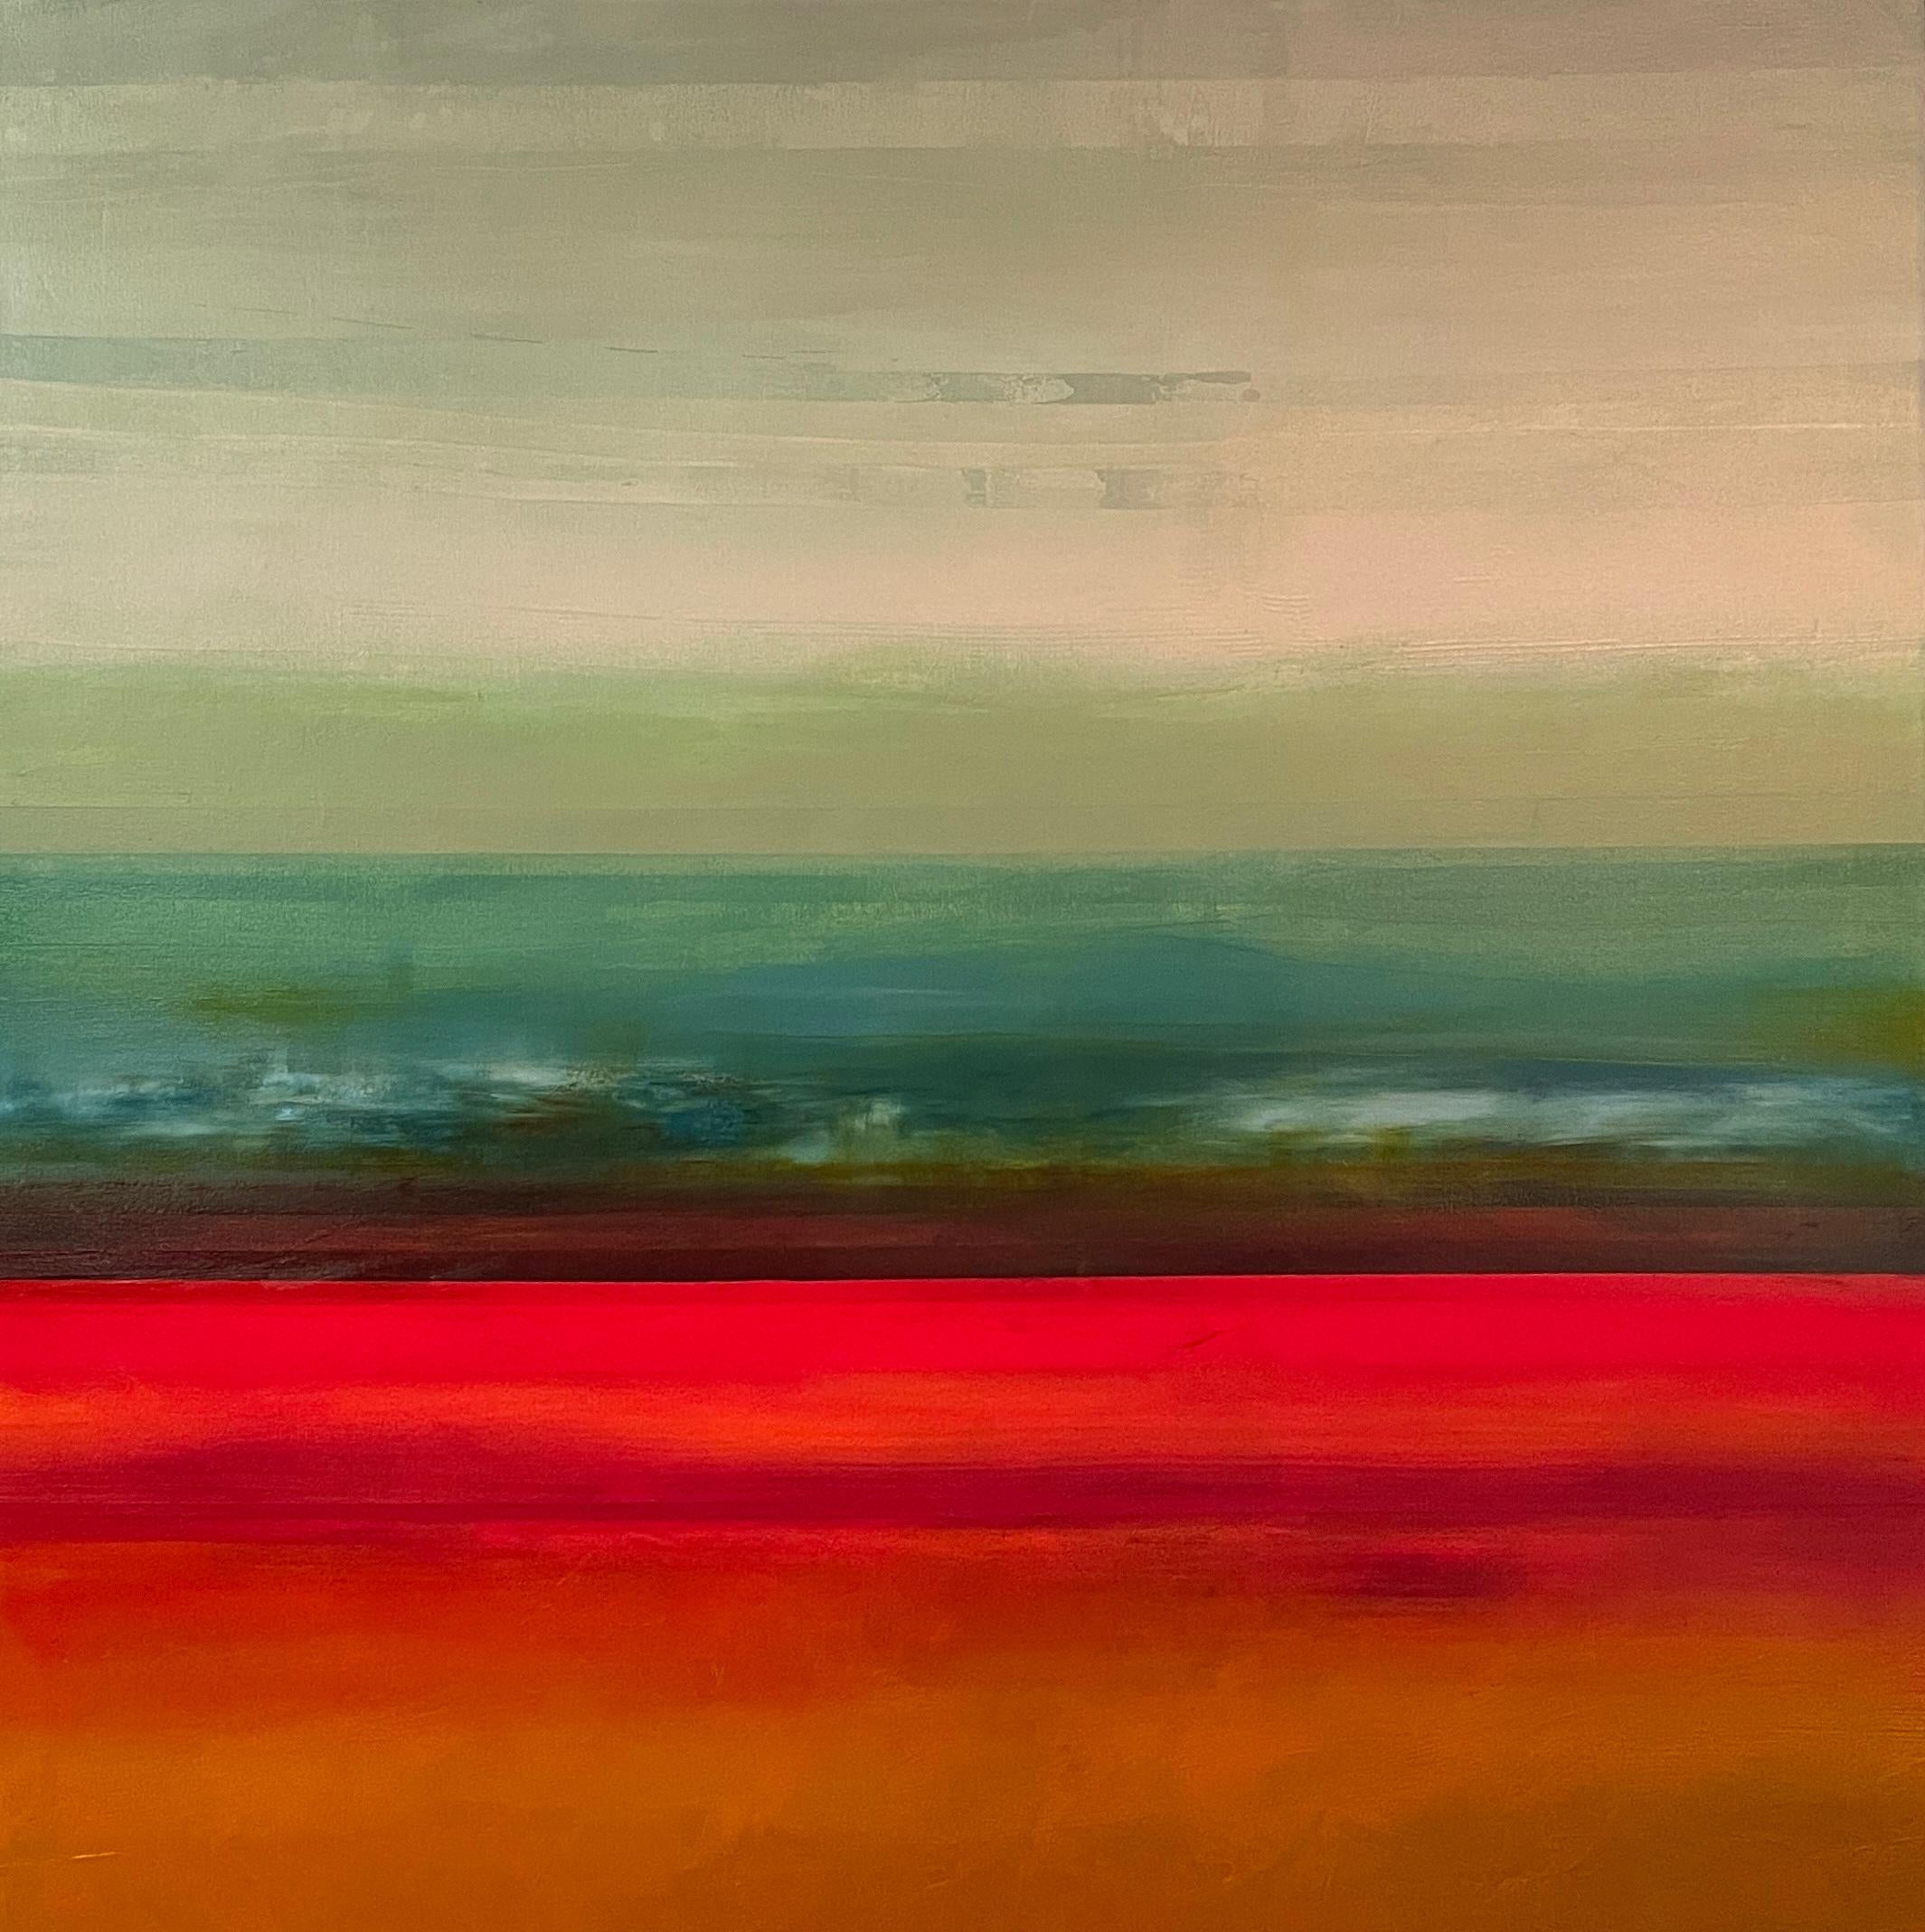 Katheryn Holt Landscape Painting - "Into the Sky" Large Mixed Media Contemporary Abstract Expressionist Landscape